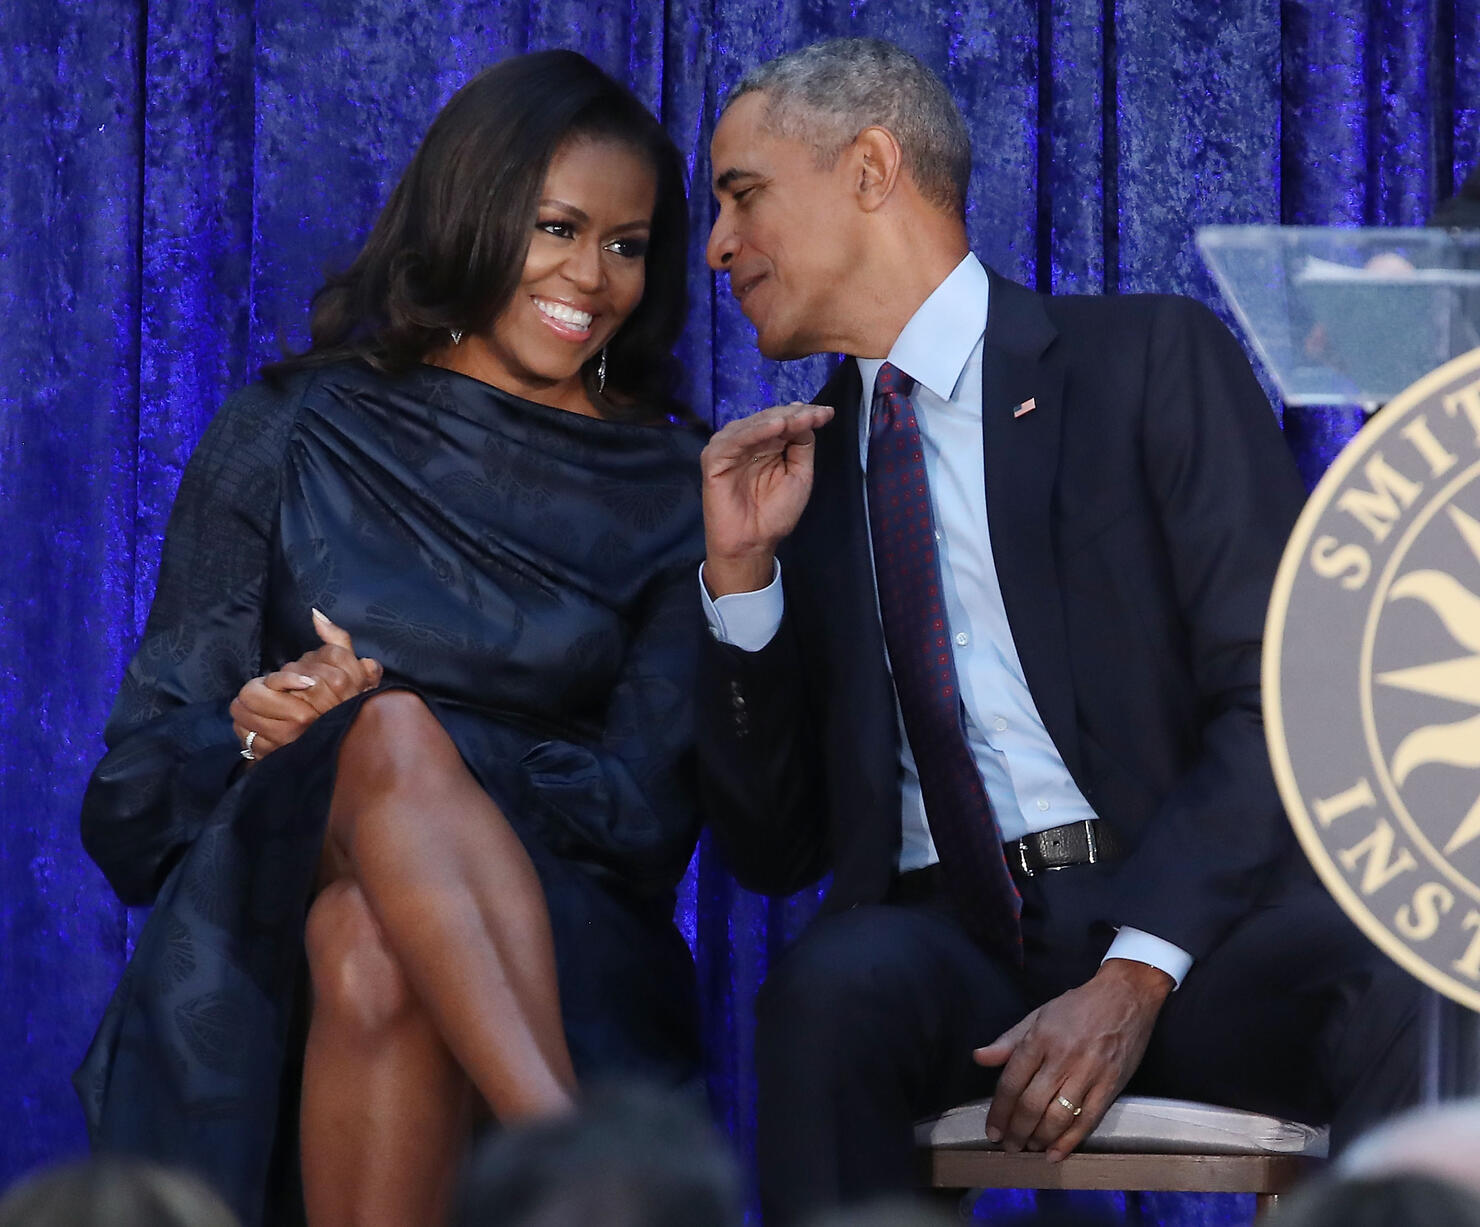 Obamas make multi-year deal with Netflix to produce documentaries